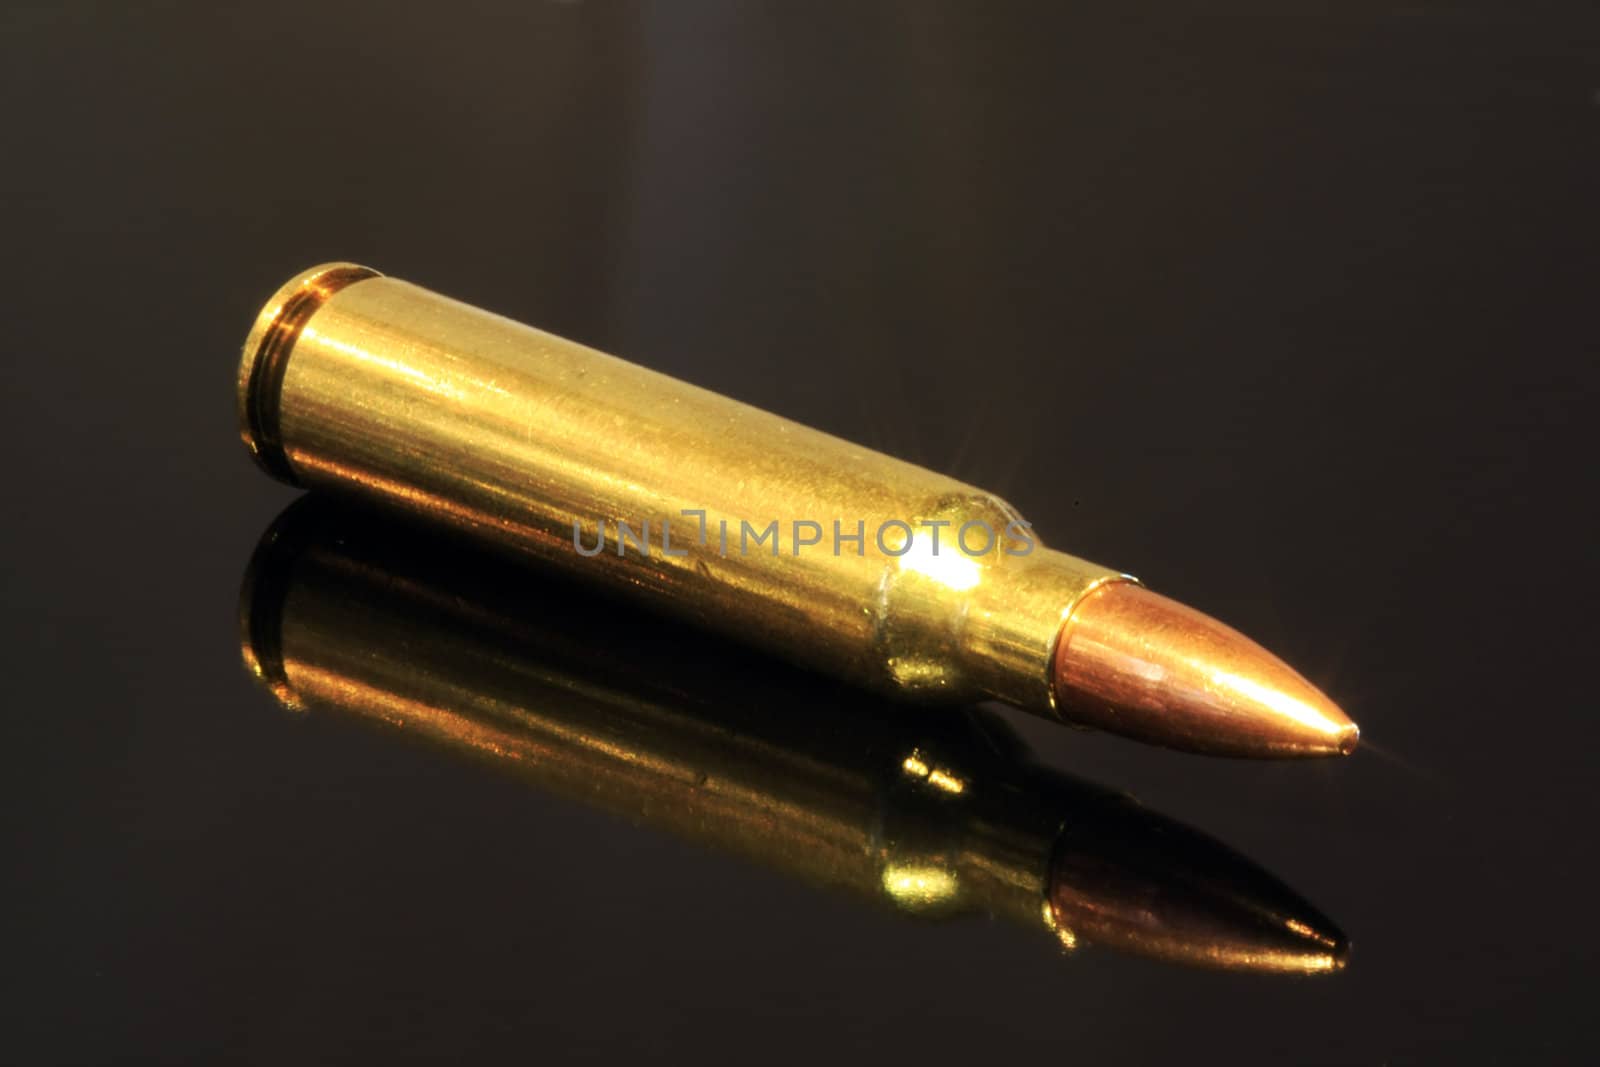 R5 / AK-47 bullet by ChrisAlleaume